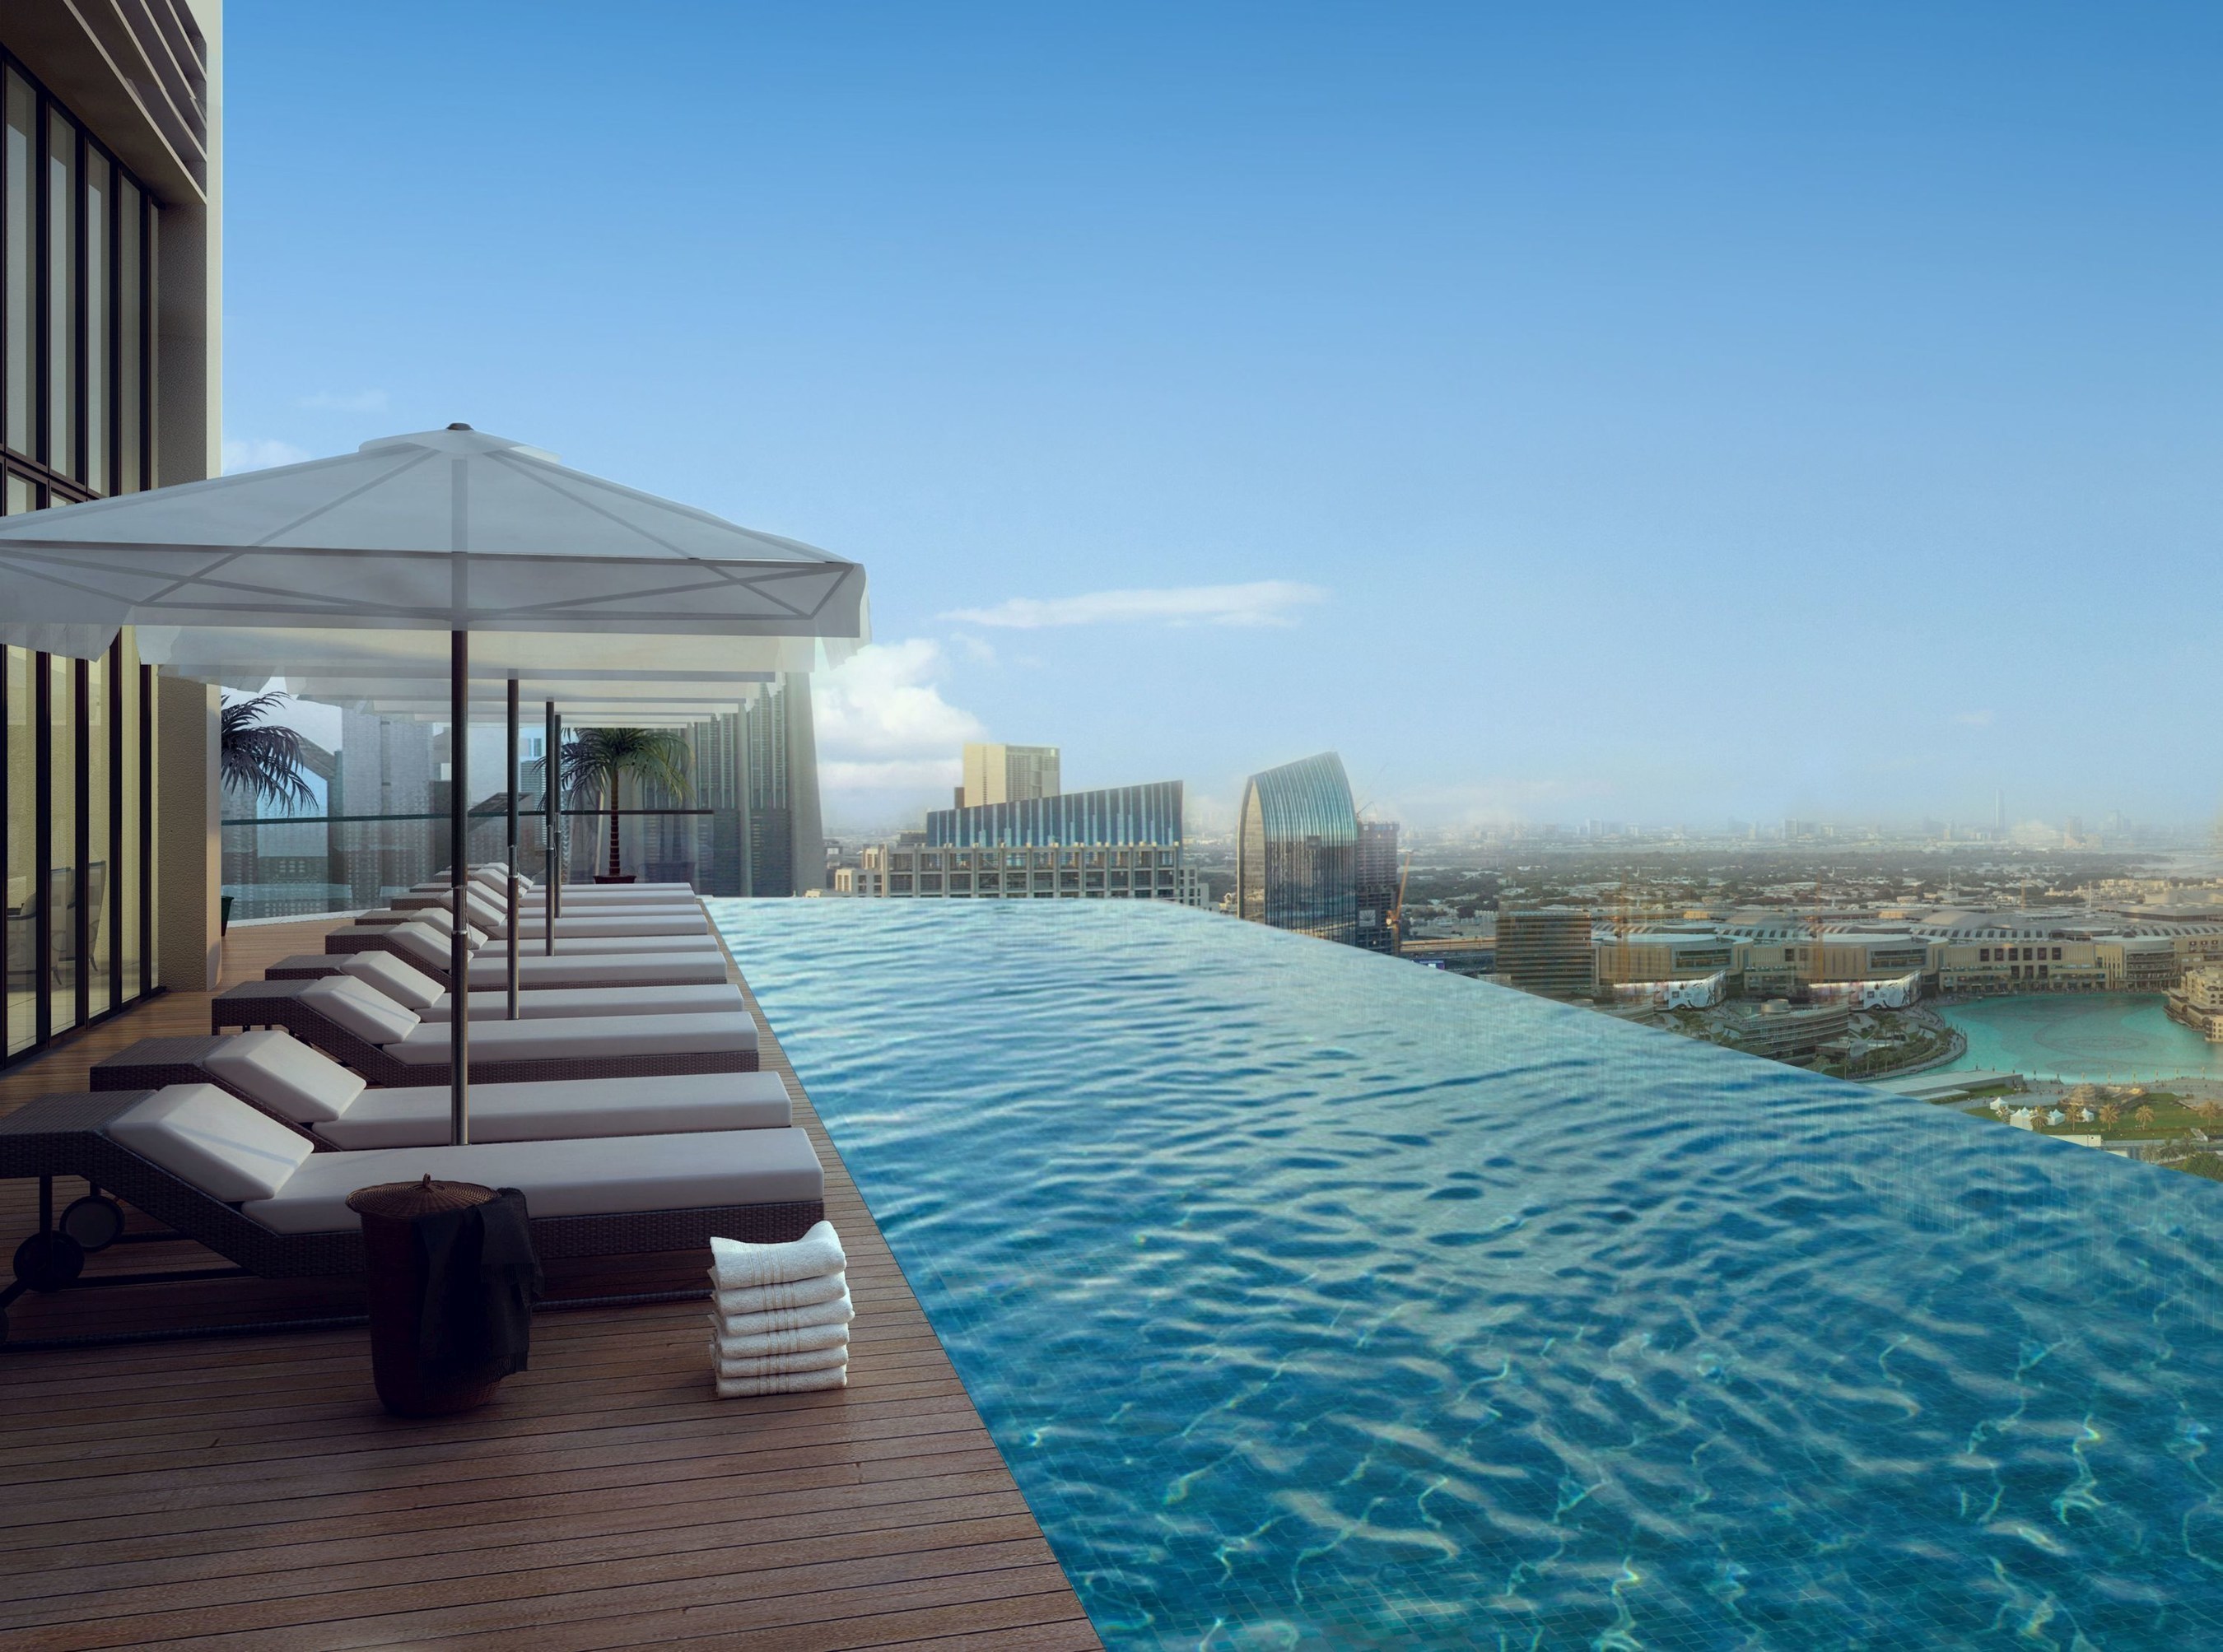 Infinity Pool at the top of the Paramount Tower Hotel Residences-Dubai (PRNewsFoto/Qfang and DAMAC Properties) (PRNewsFoto/Qfang and DAMAC Properties)